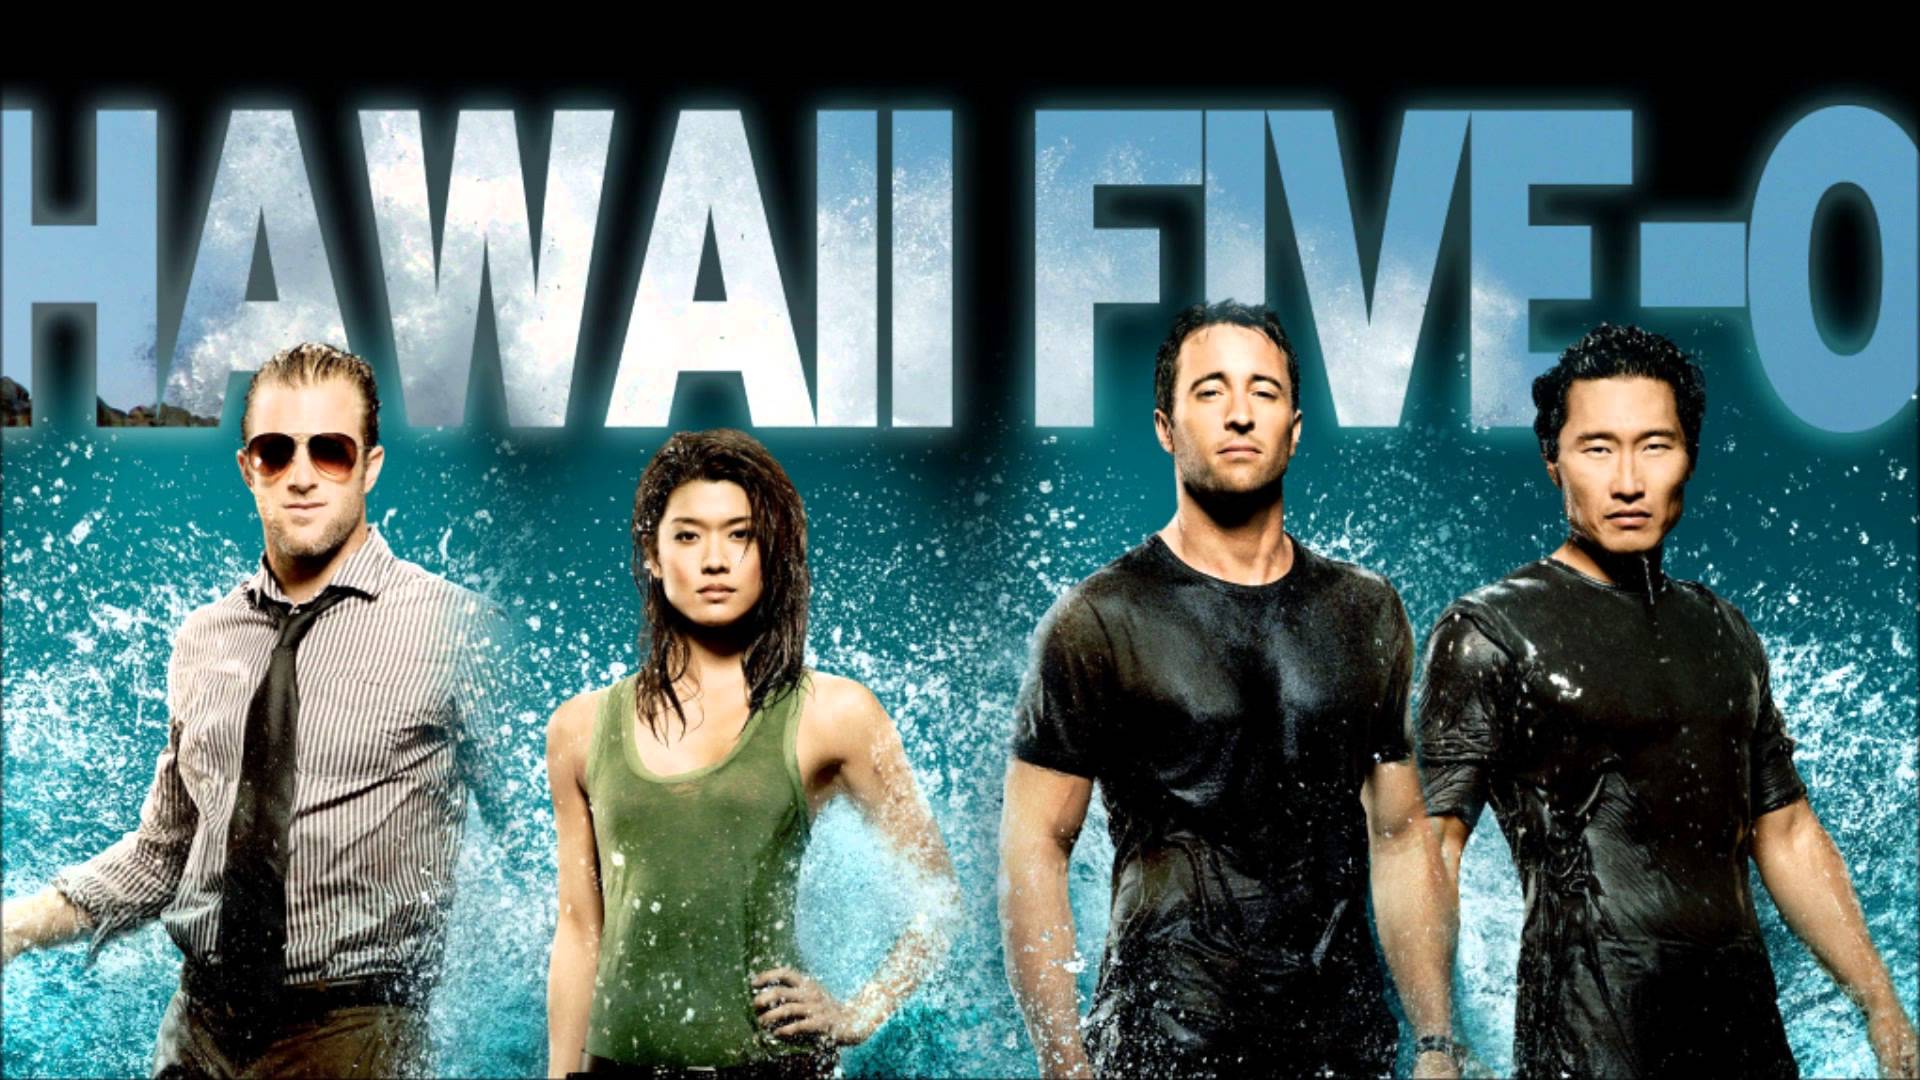 Amazing Hawaii Five-0 Pictures & Backgrounds